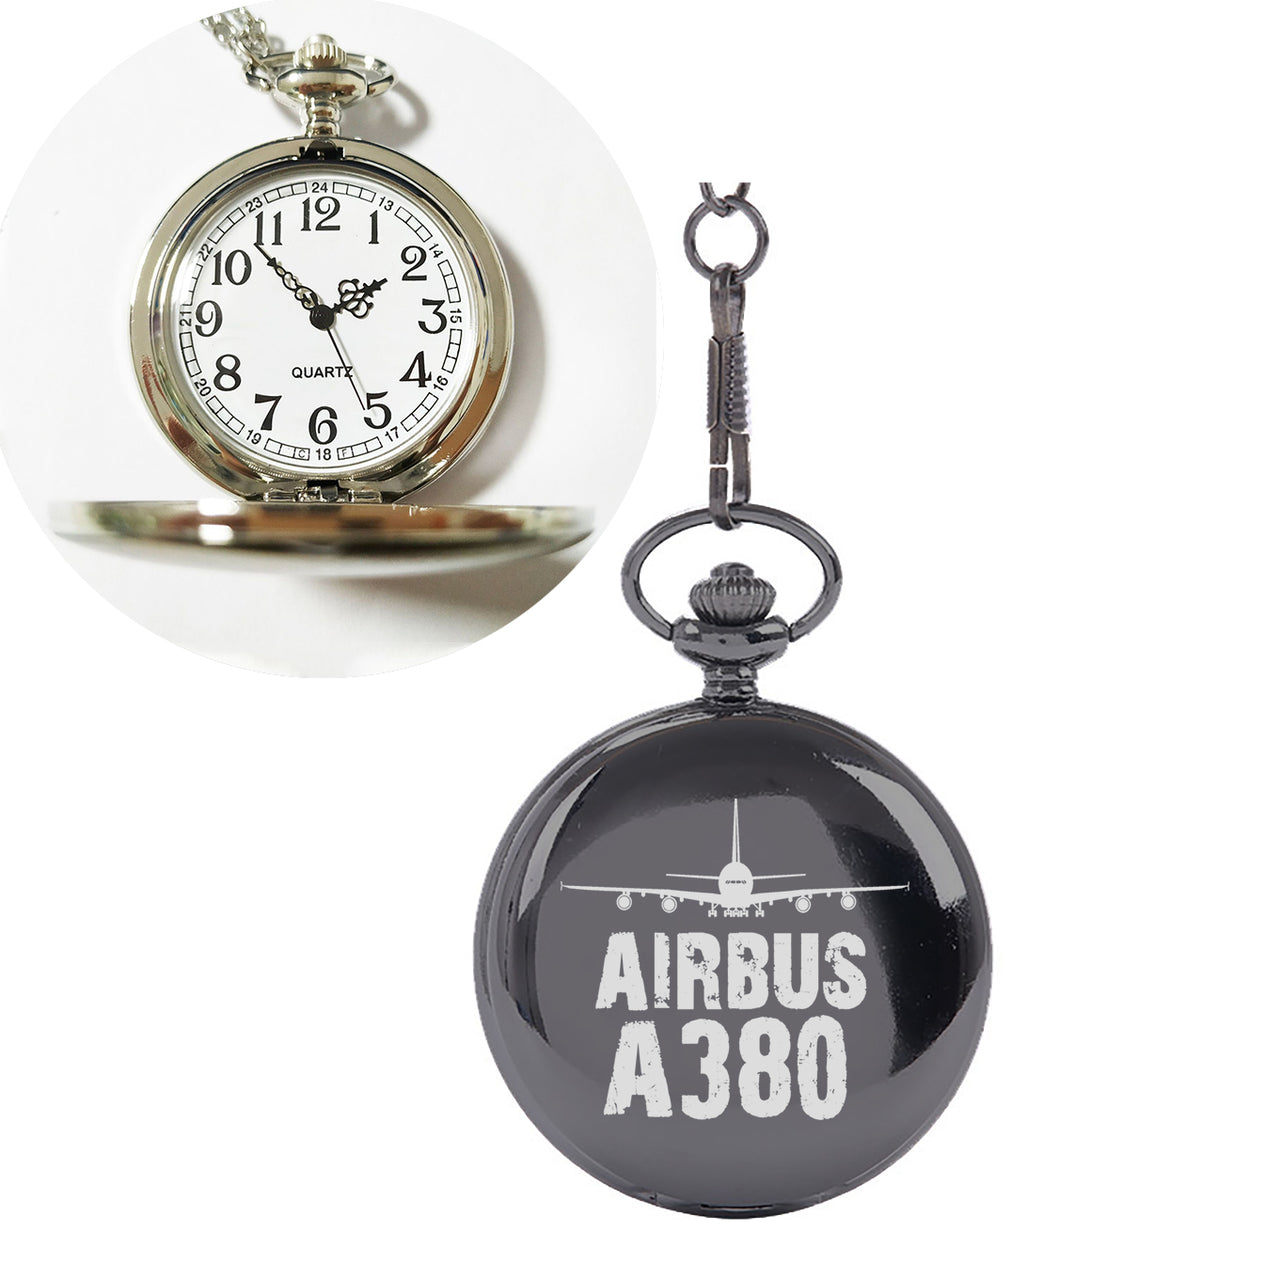 Airbus A380 & Plane Designed Pocket Watches